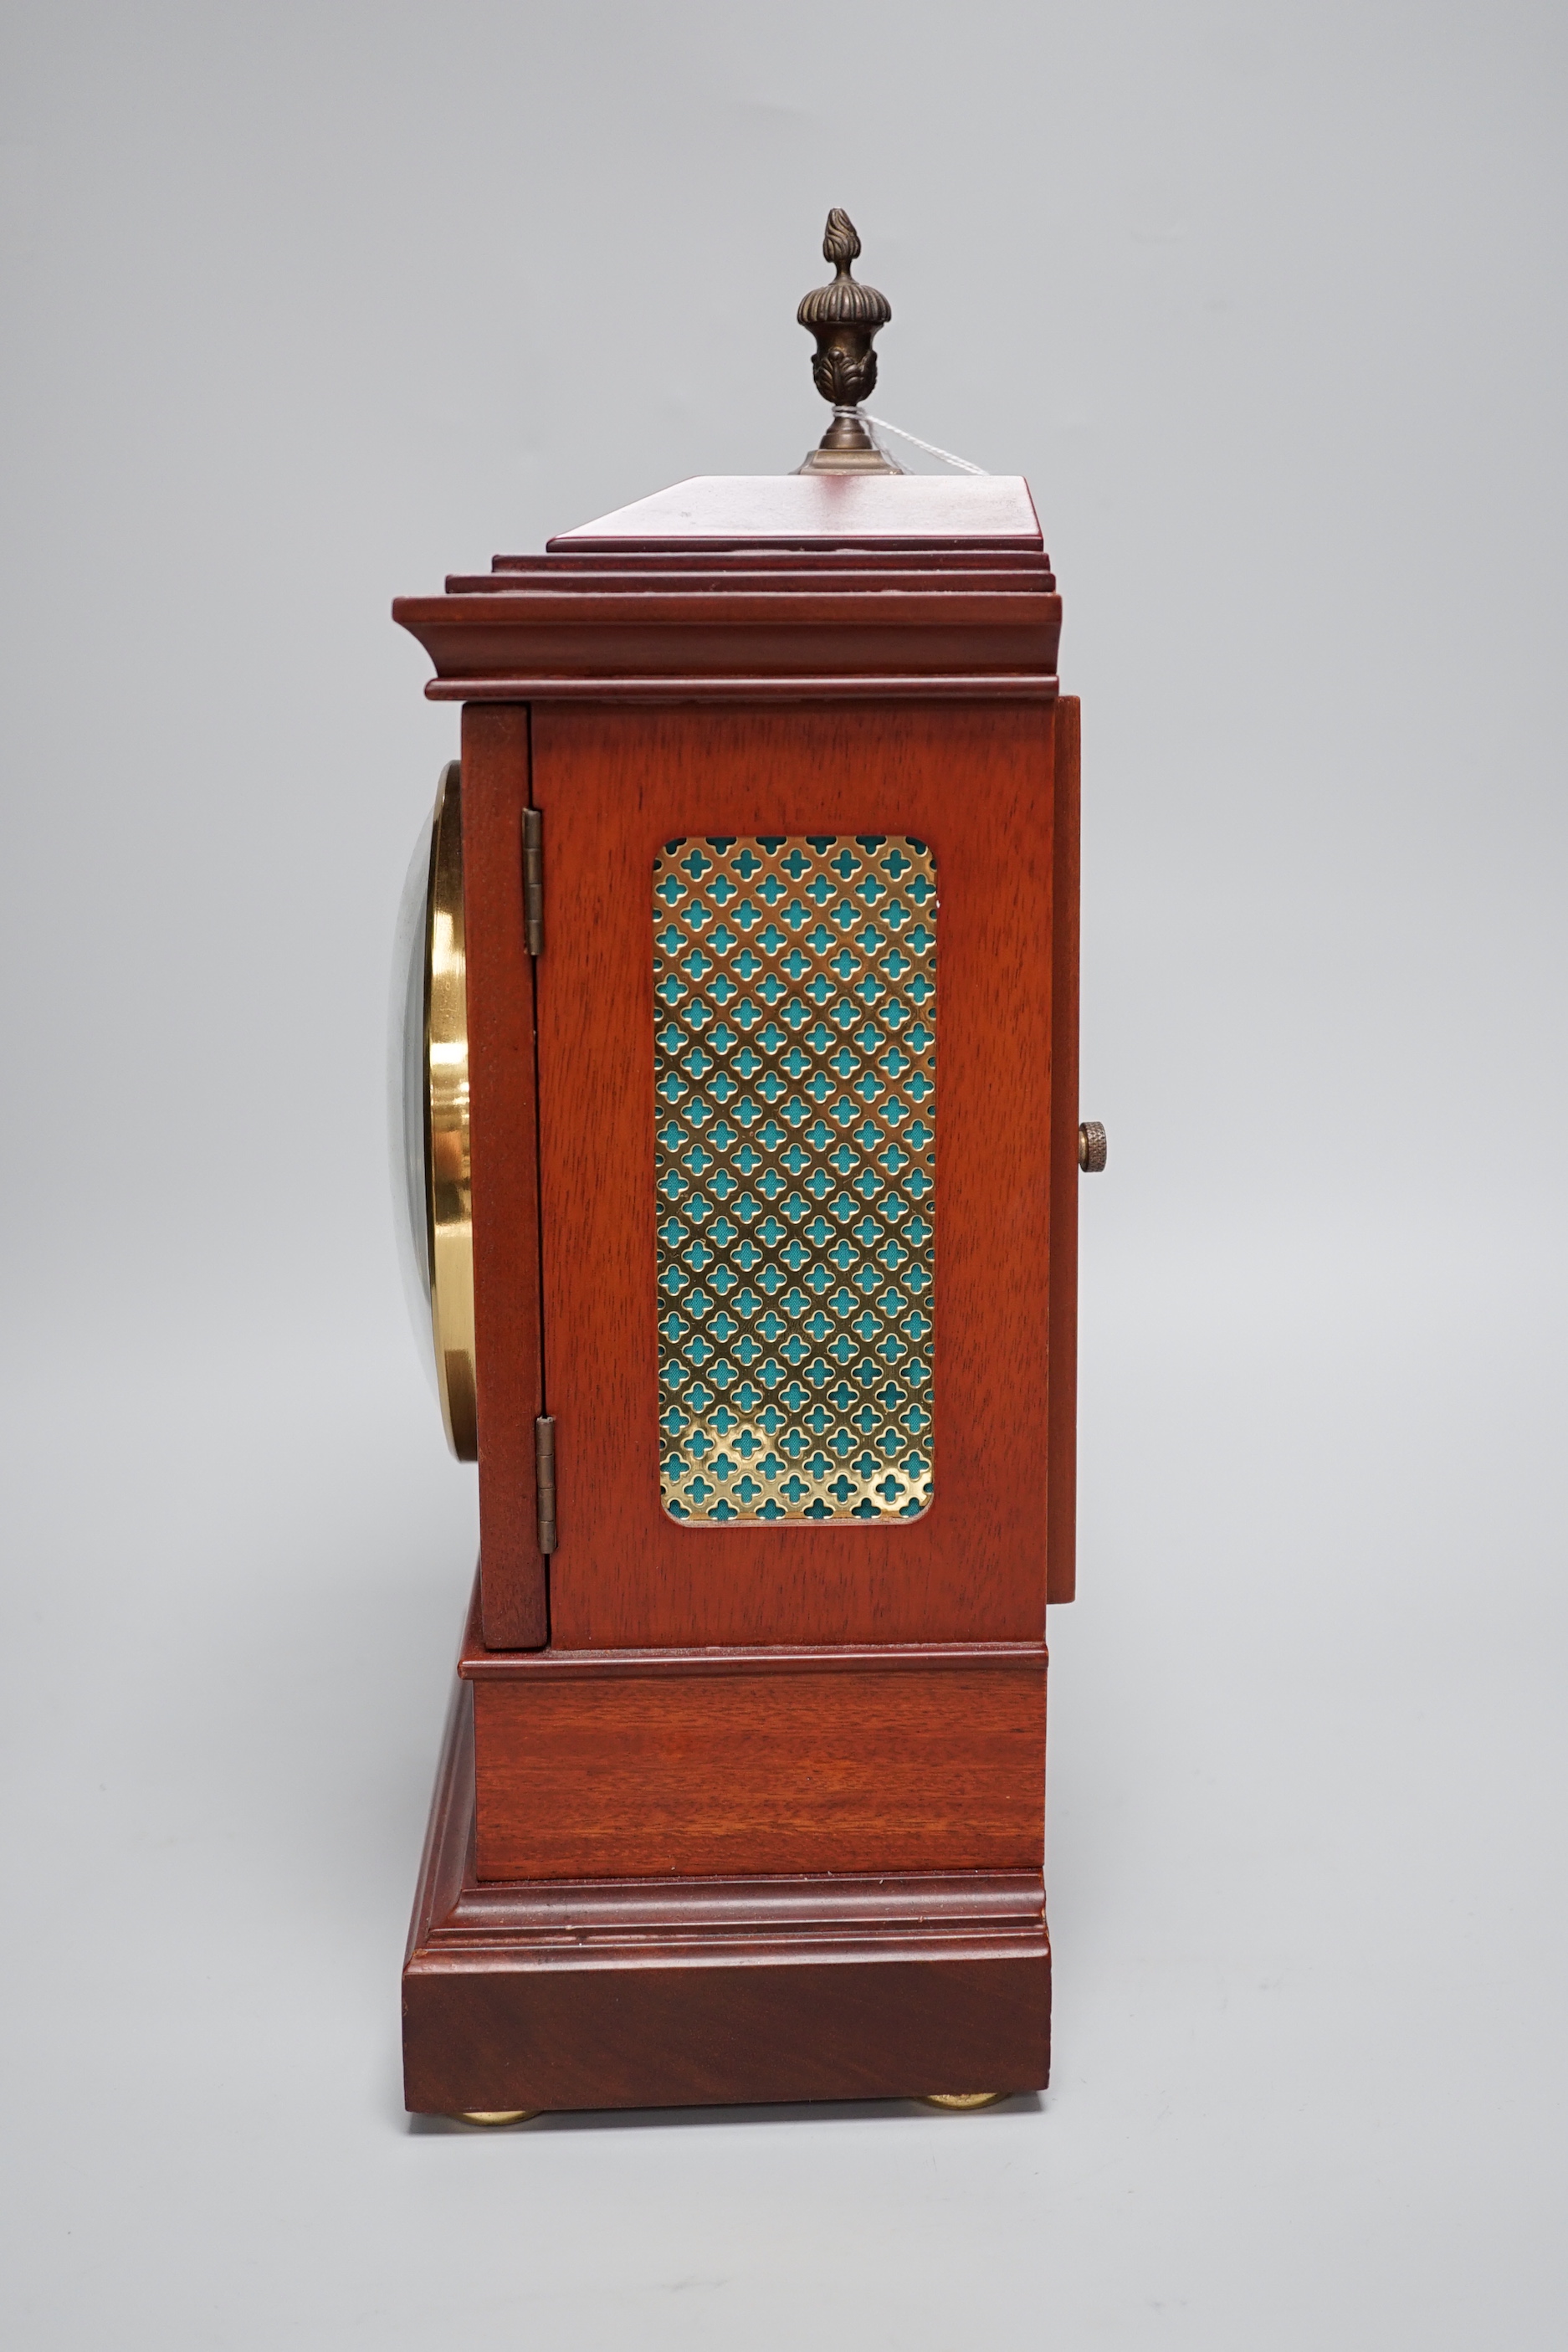 Sewills, Liverpool. An inlaid mantel clock with three train balance escapement movement, chiming on eight gongs, 37cm high